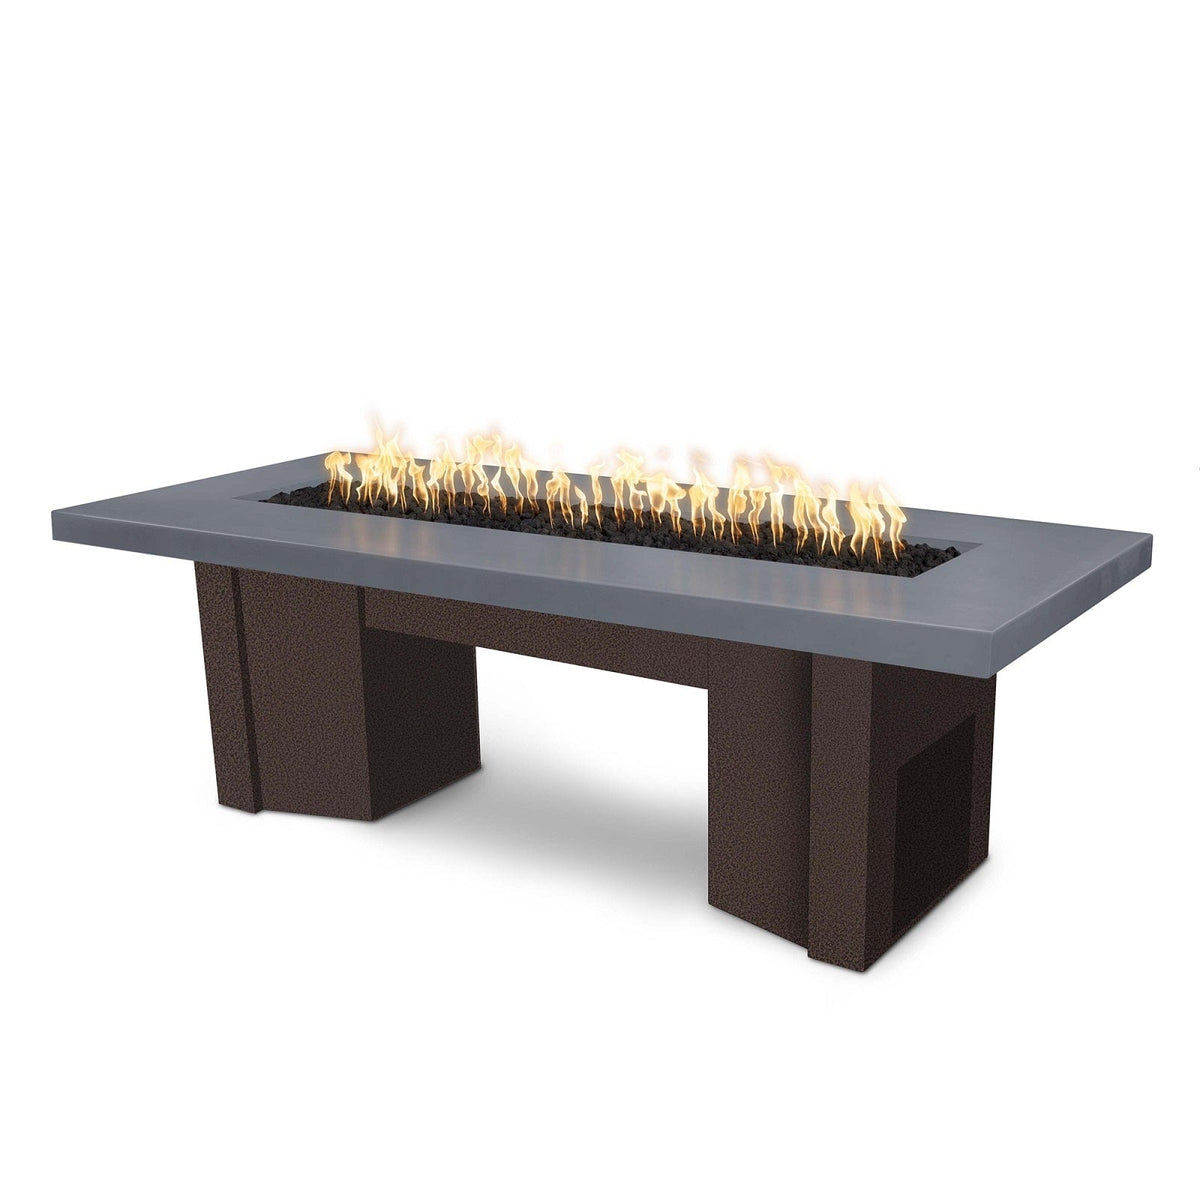 The Outdoor Plus Fire Features Gray (-GRY) / Copper Vein Powder Coated Steel (-CPV) The Outdoor Plus 60&quot; Alameda Fire Table Smooth Concrete in Natural Gas - 110V Plug &amp; Play Electronic Ignition / OPT-ALMGFRC60EKIT-NG